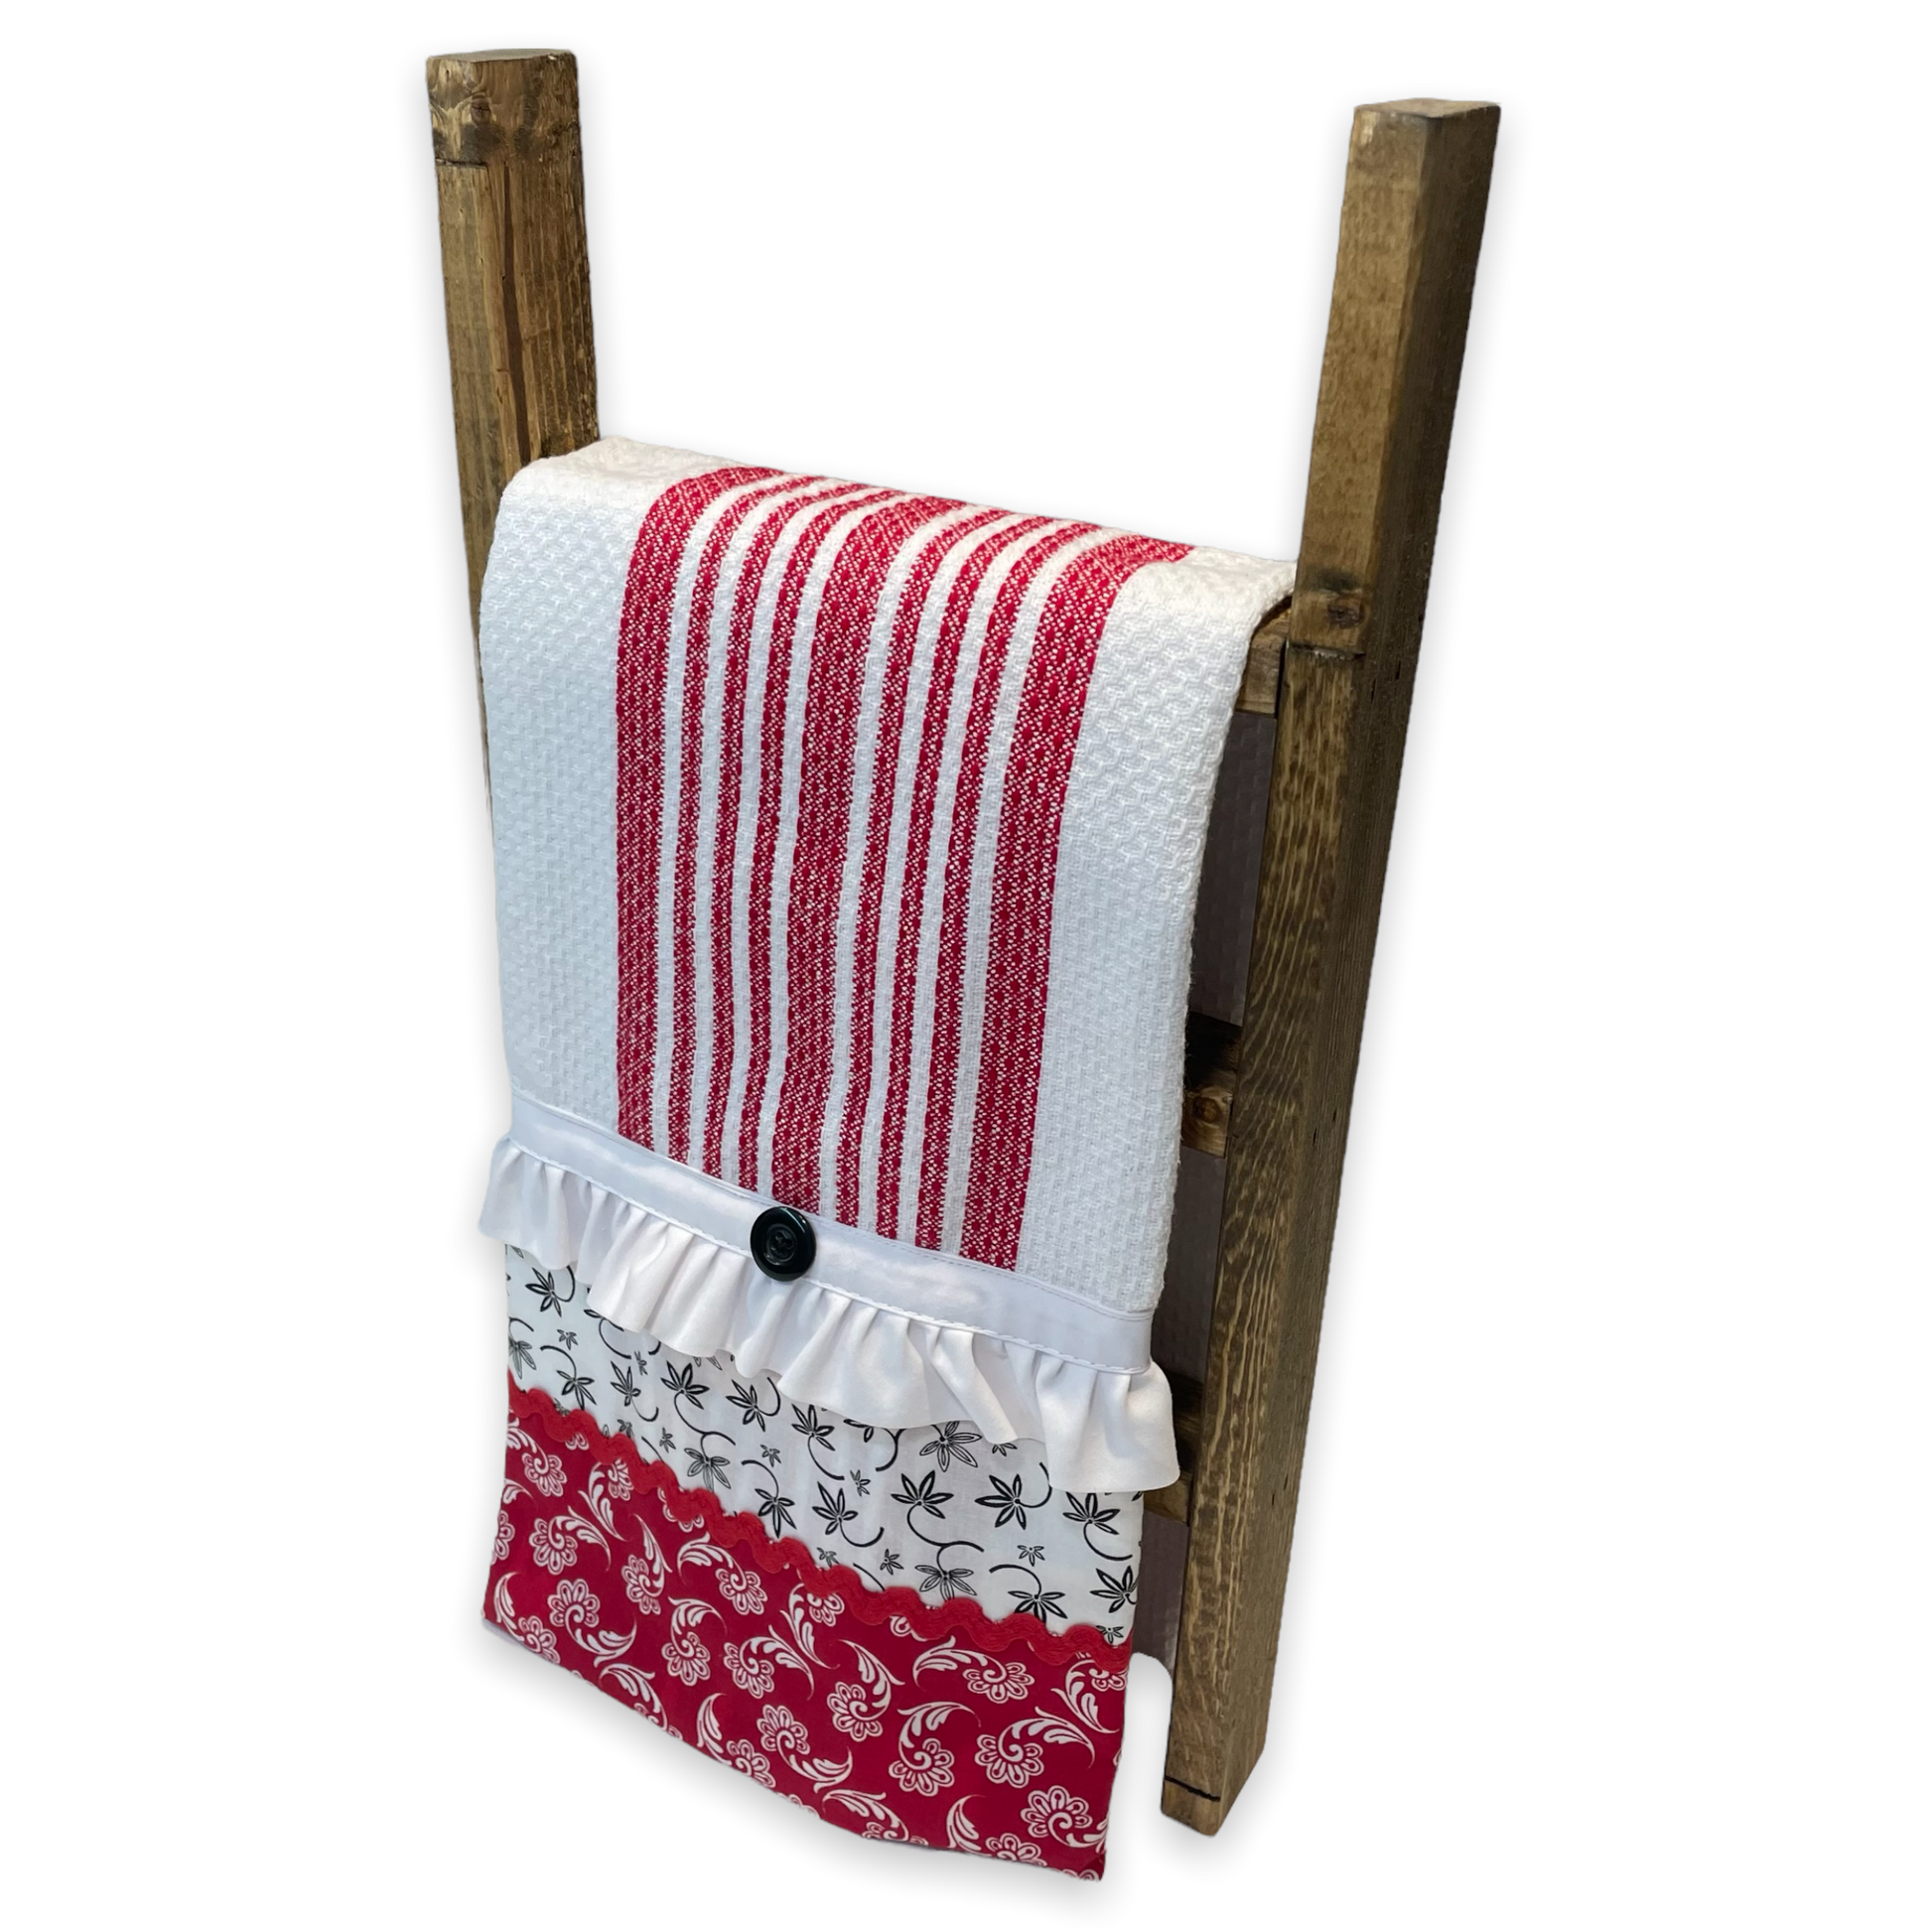 Red and white country style dish towel. Featuring red and white checked toweling; red white and black quilt cotton accents and white cotton lace trim and a double button embellishment. Part of a mix and match collection of coordinated farmhouse fabulous decor. Browse the collections and be sure to check out the Home Stitchery Decor YouTube Channel.